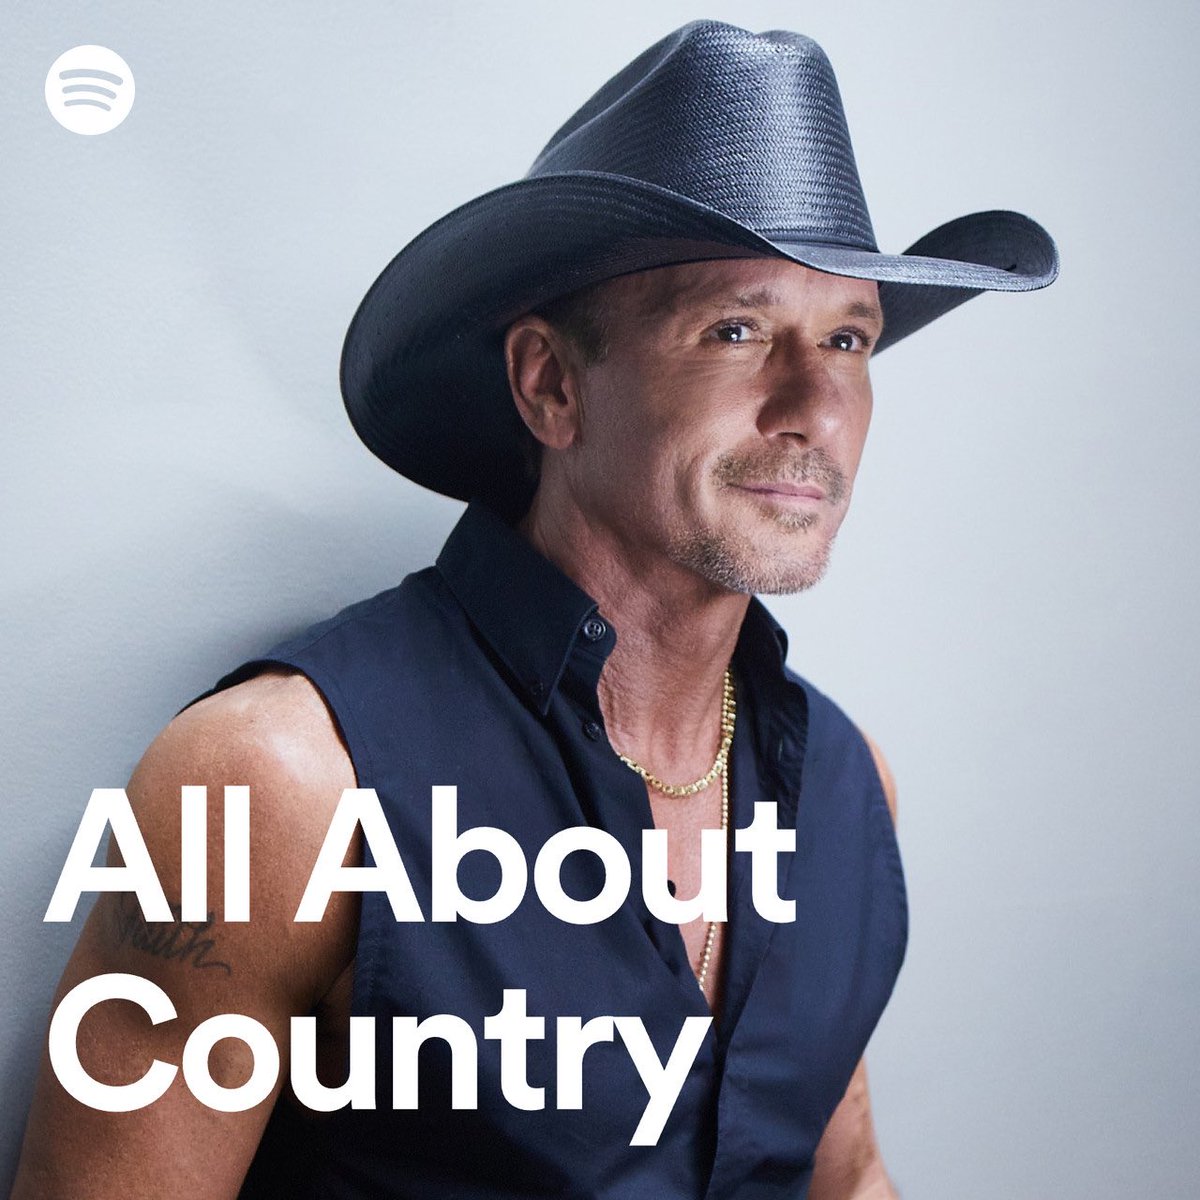 'Standing Room Only' by @thetimmcgraw is here! For an inside look, swing by the All About Country playlist on your mobile device and dive into Playlist Stories. There, Tim recounts unforgettable moments from his time in Canada and delves into the inspiration behind the album.